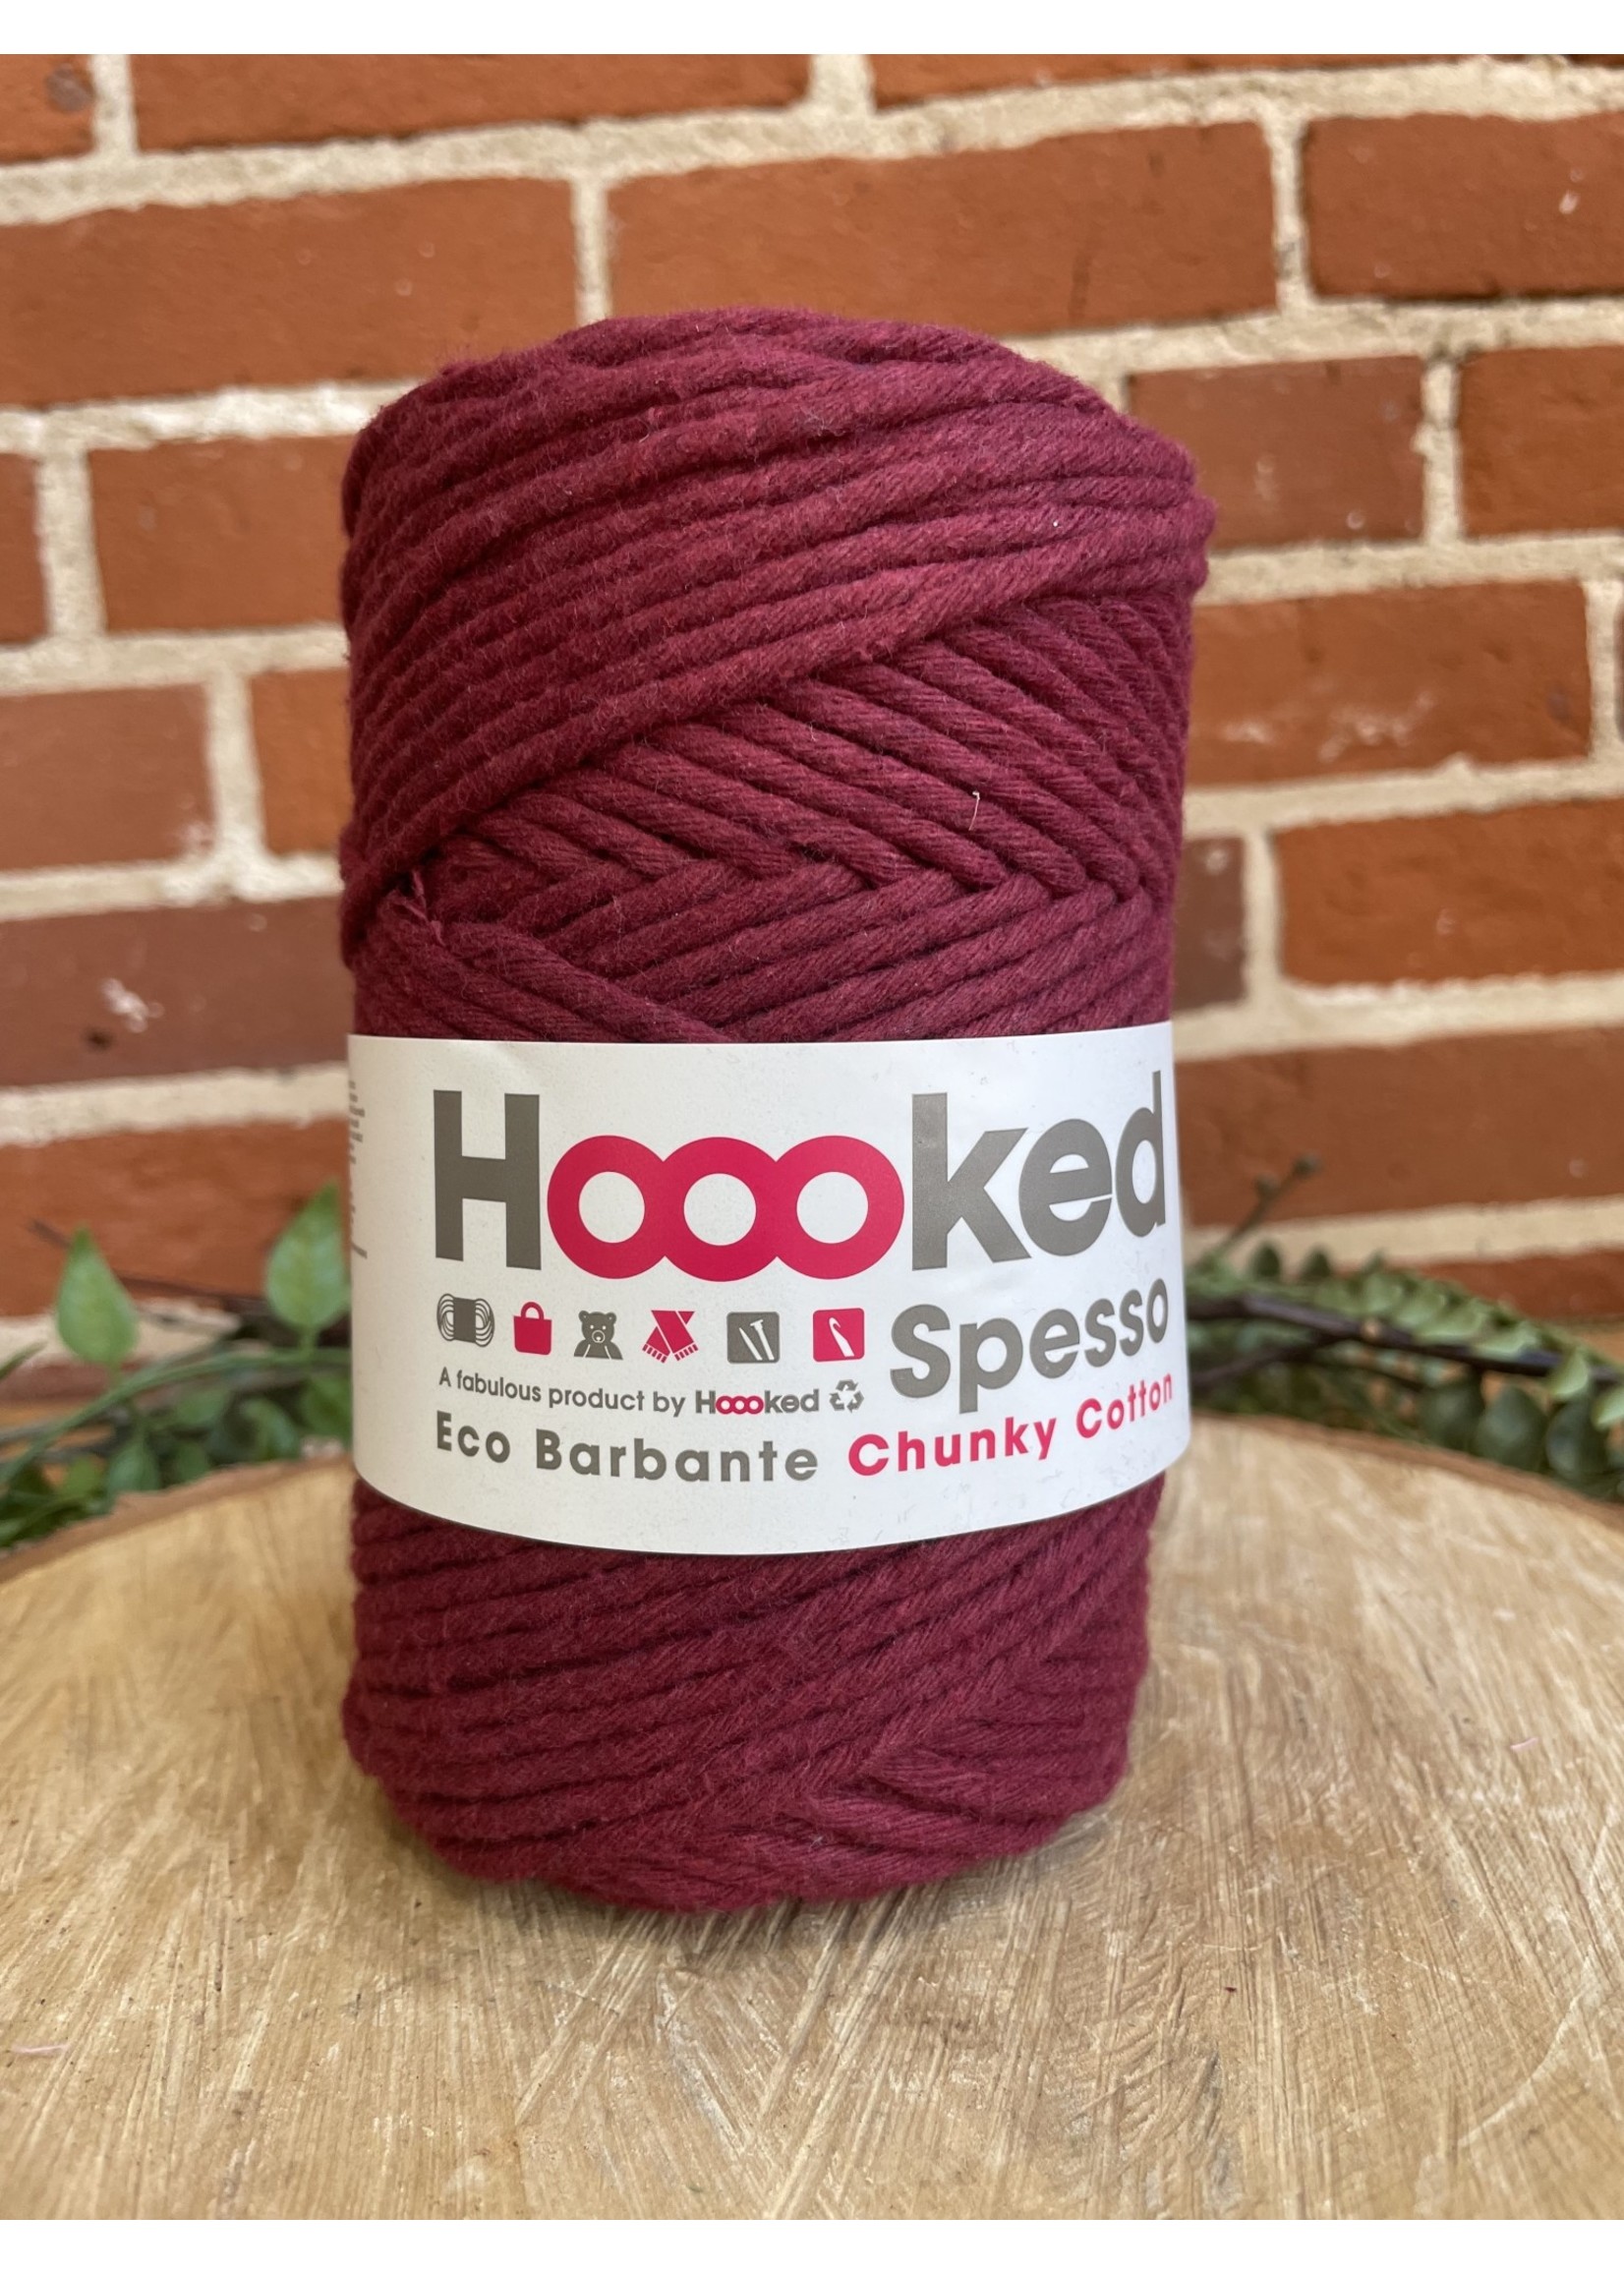 Hooked Spesso Chunky Macrame String